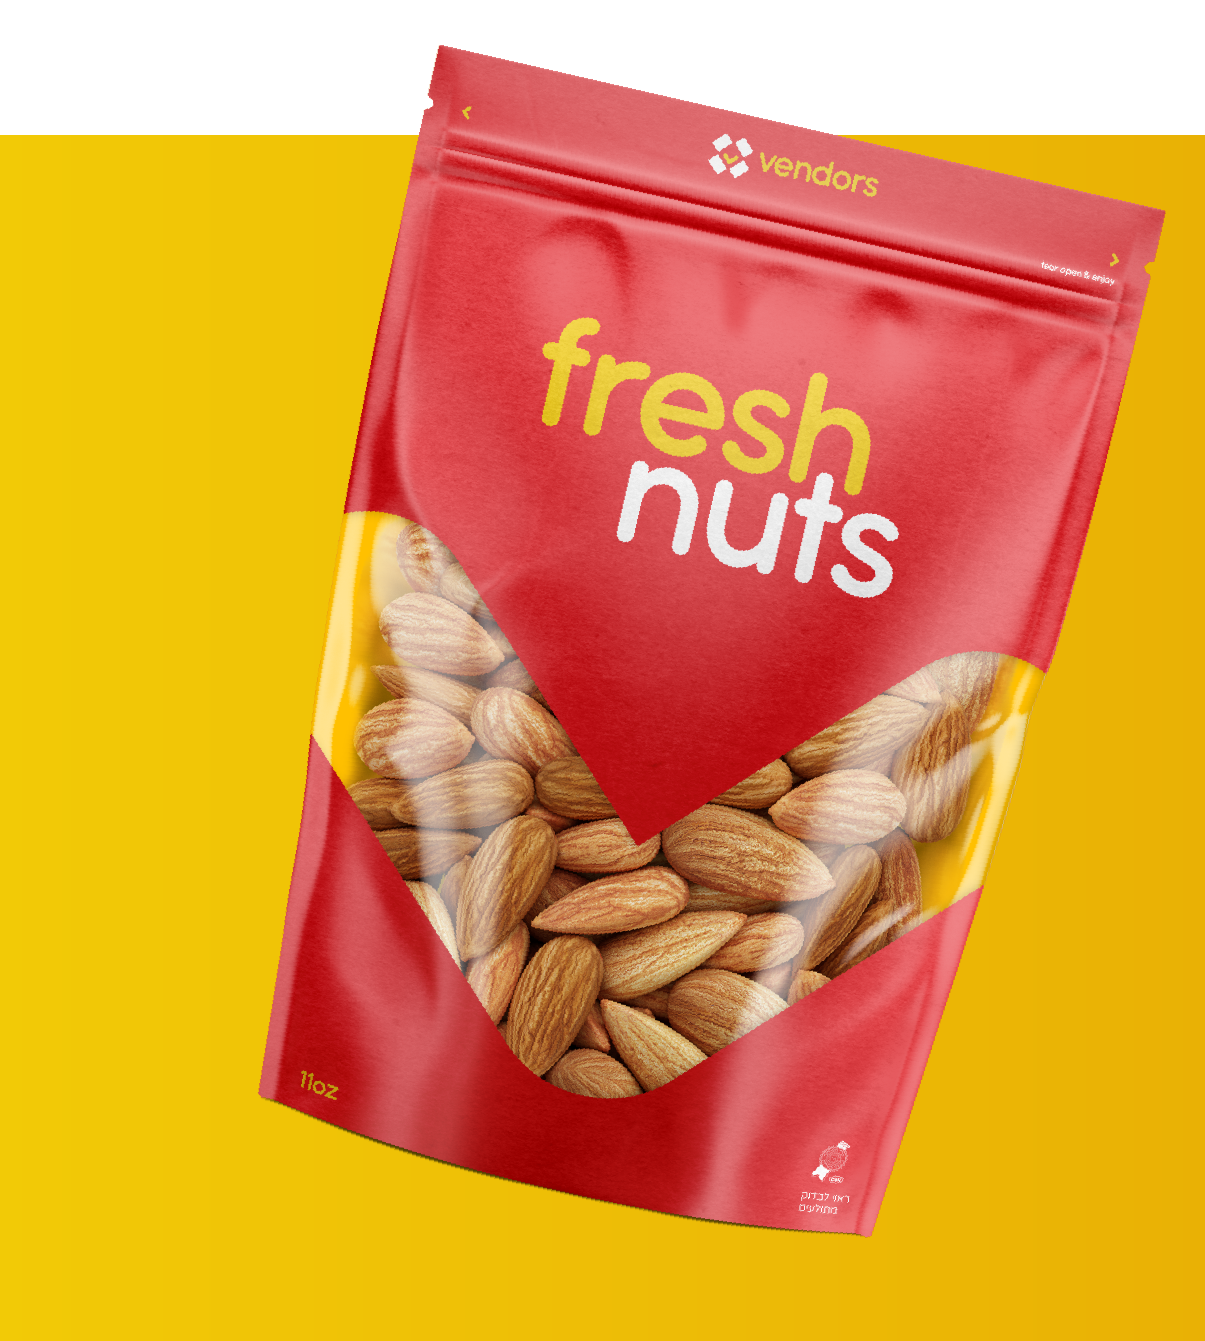 Packaging for almonds in red and yellow.